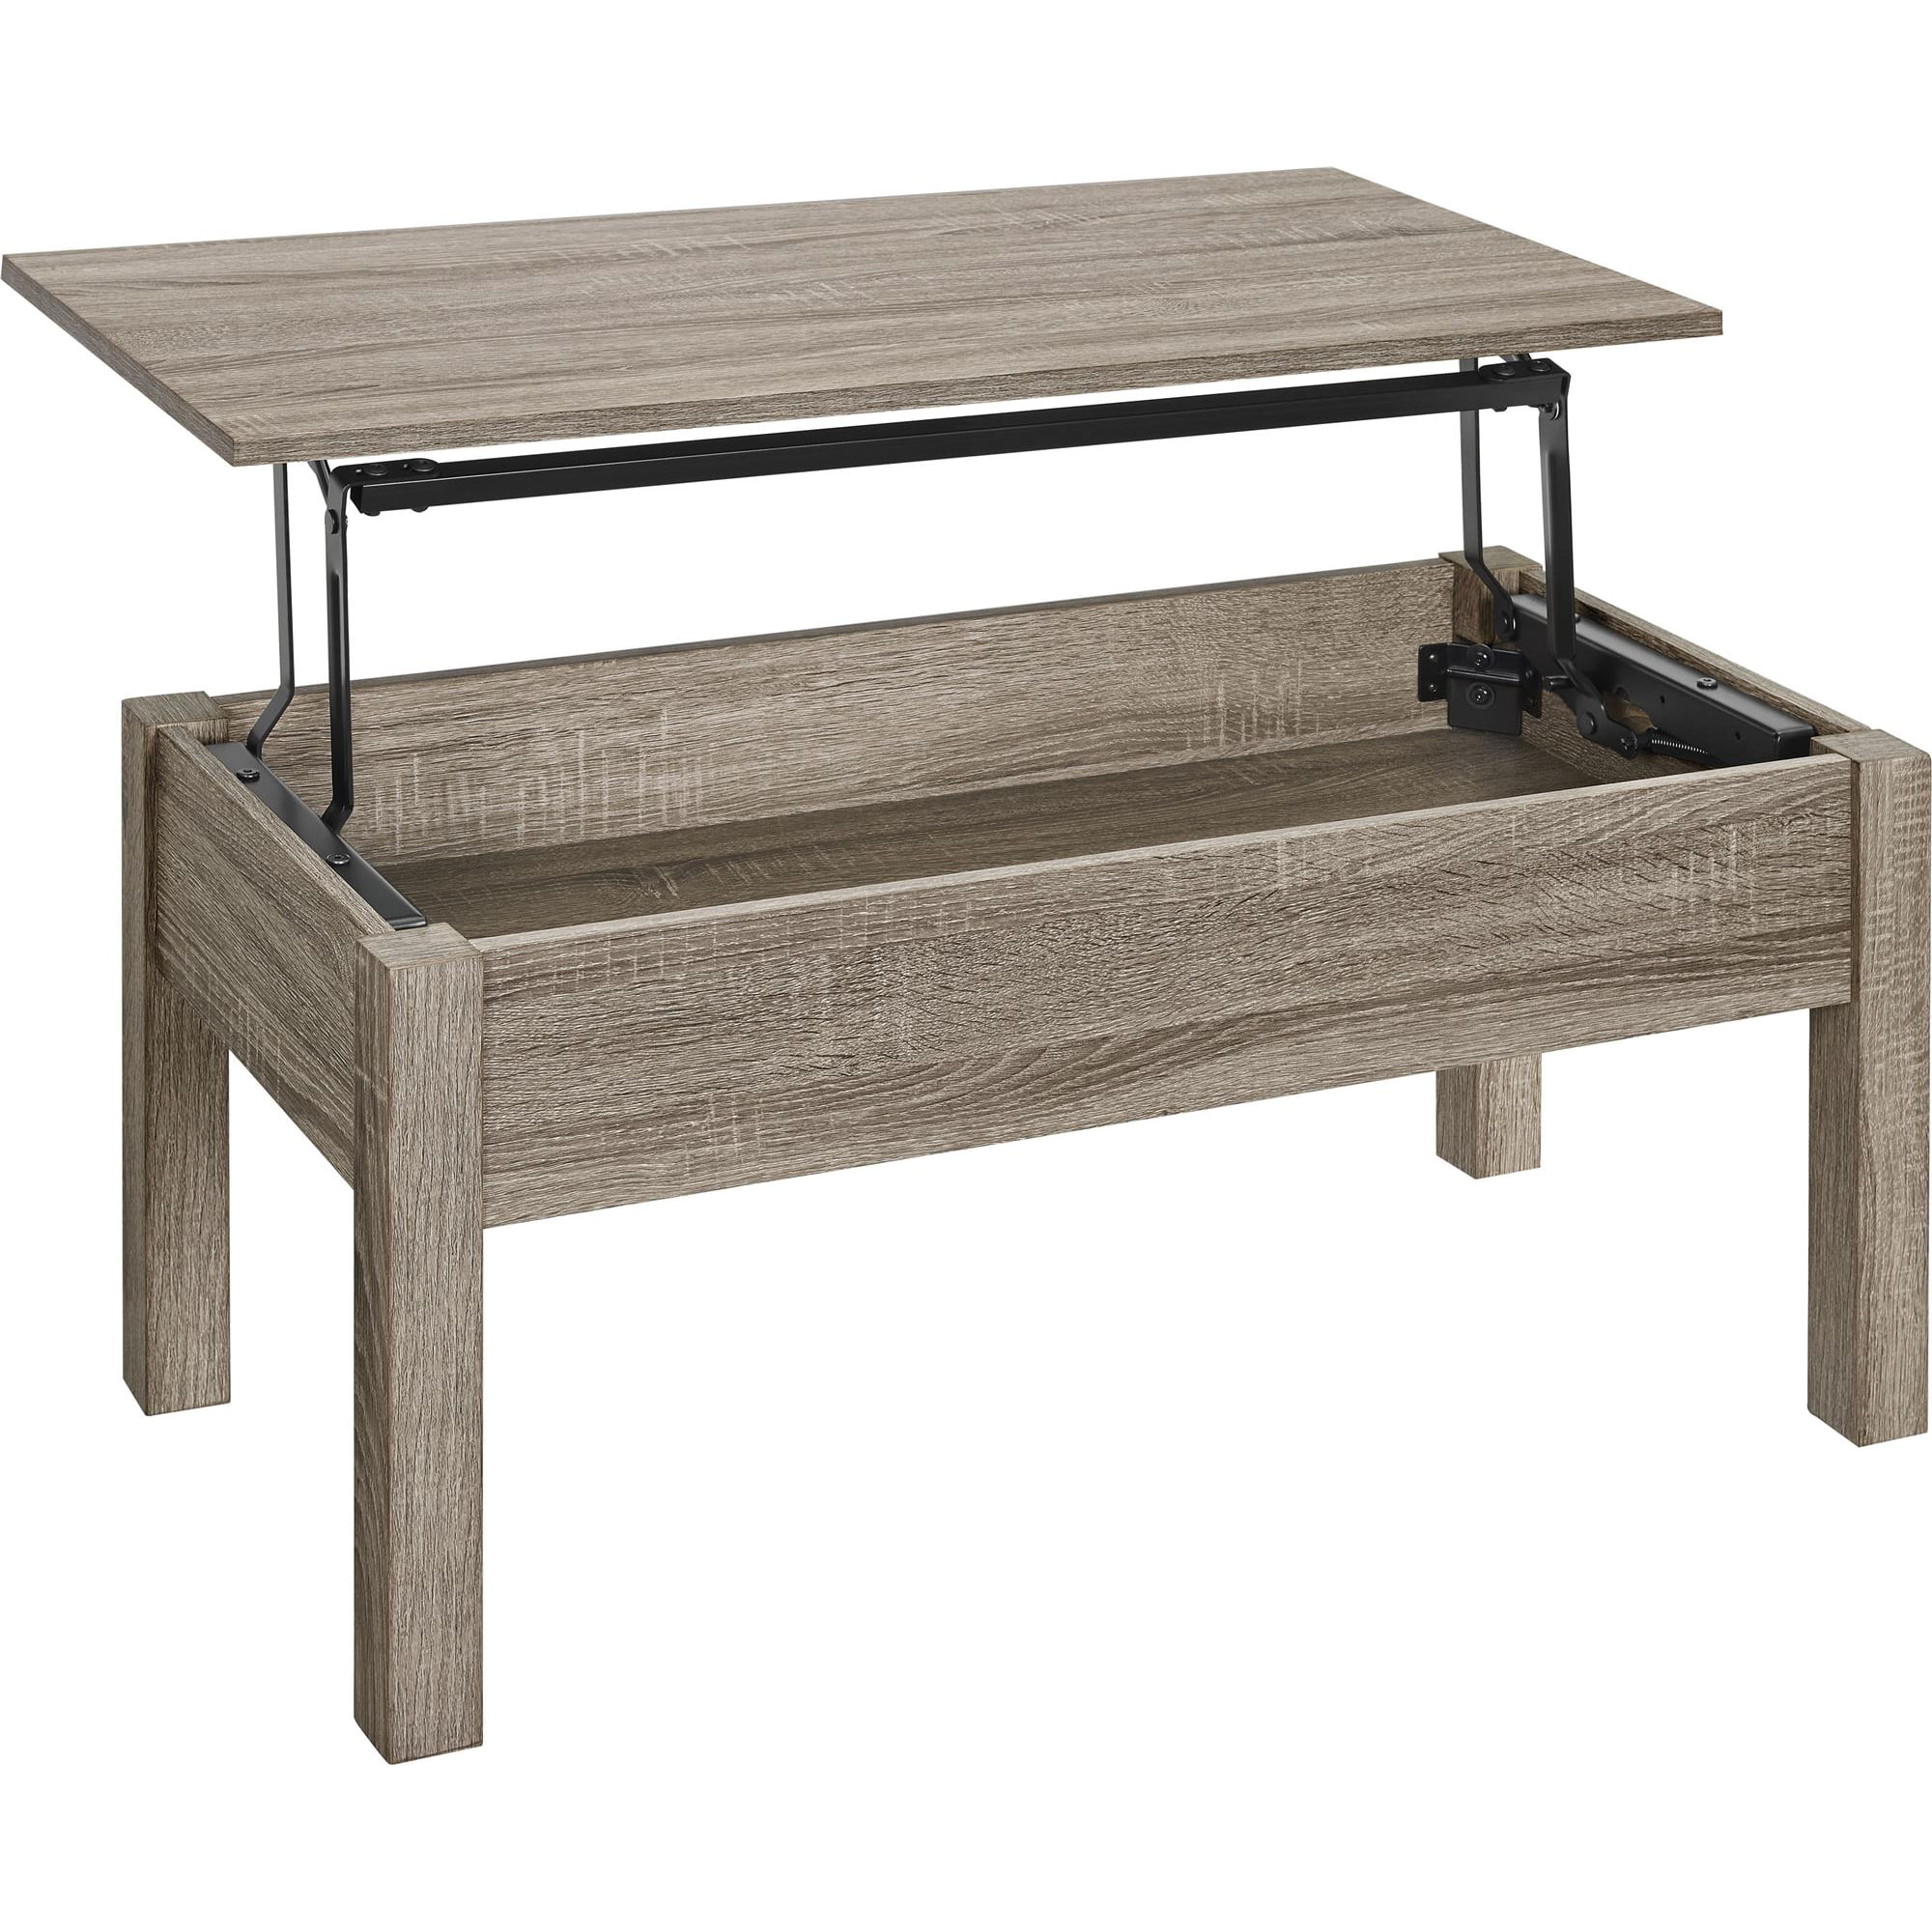 38" Mainstays Parson's Lift-Top Coffee Table (Gray Oak or Espresso) $65 + Free Shipping